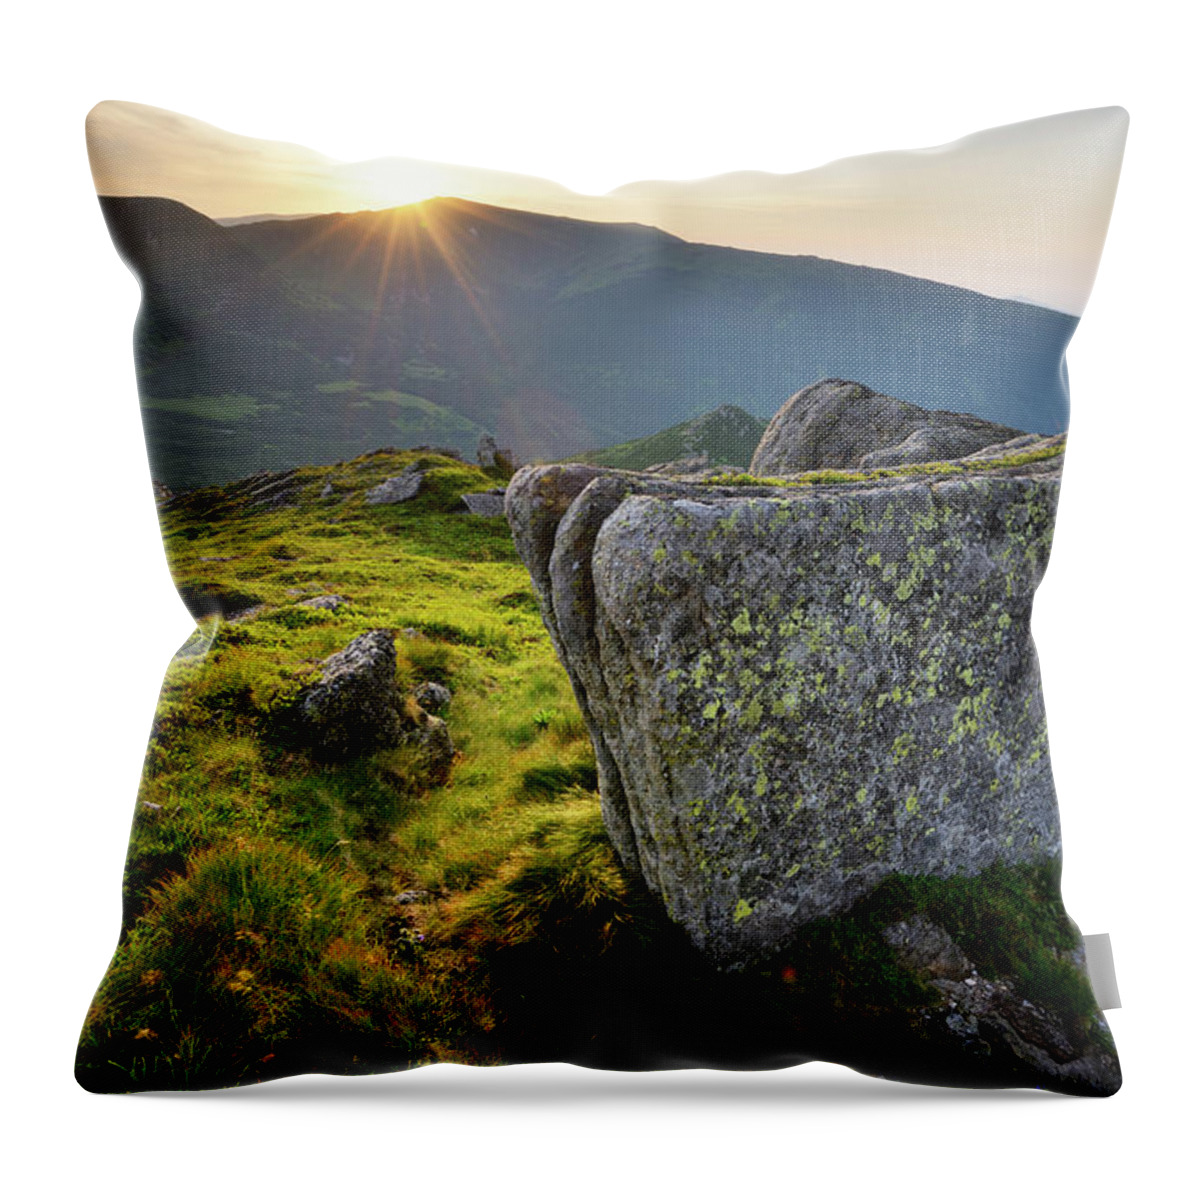 Scenics Throw Pillow featuring the photograph Bright Sunset Landscape In Mountains by Rezus